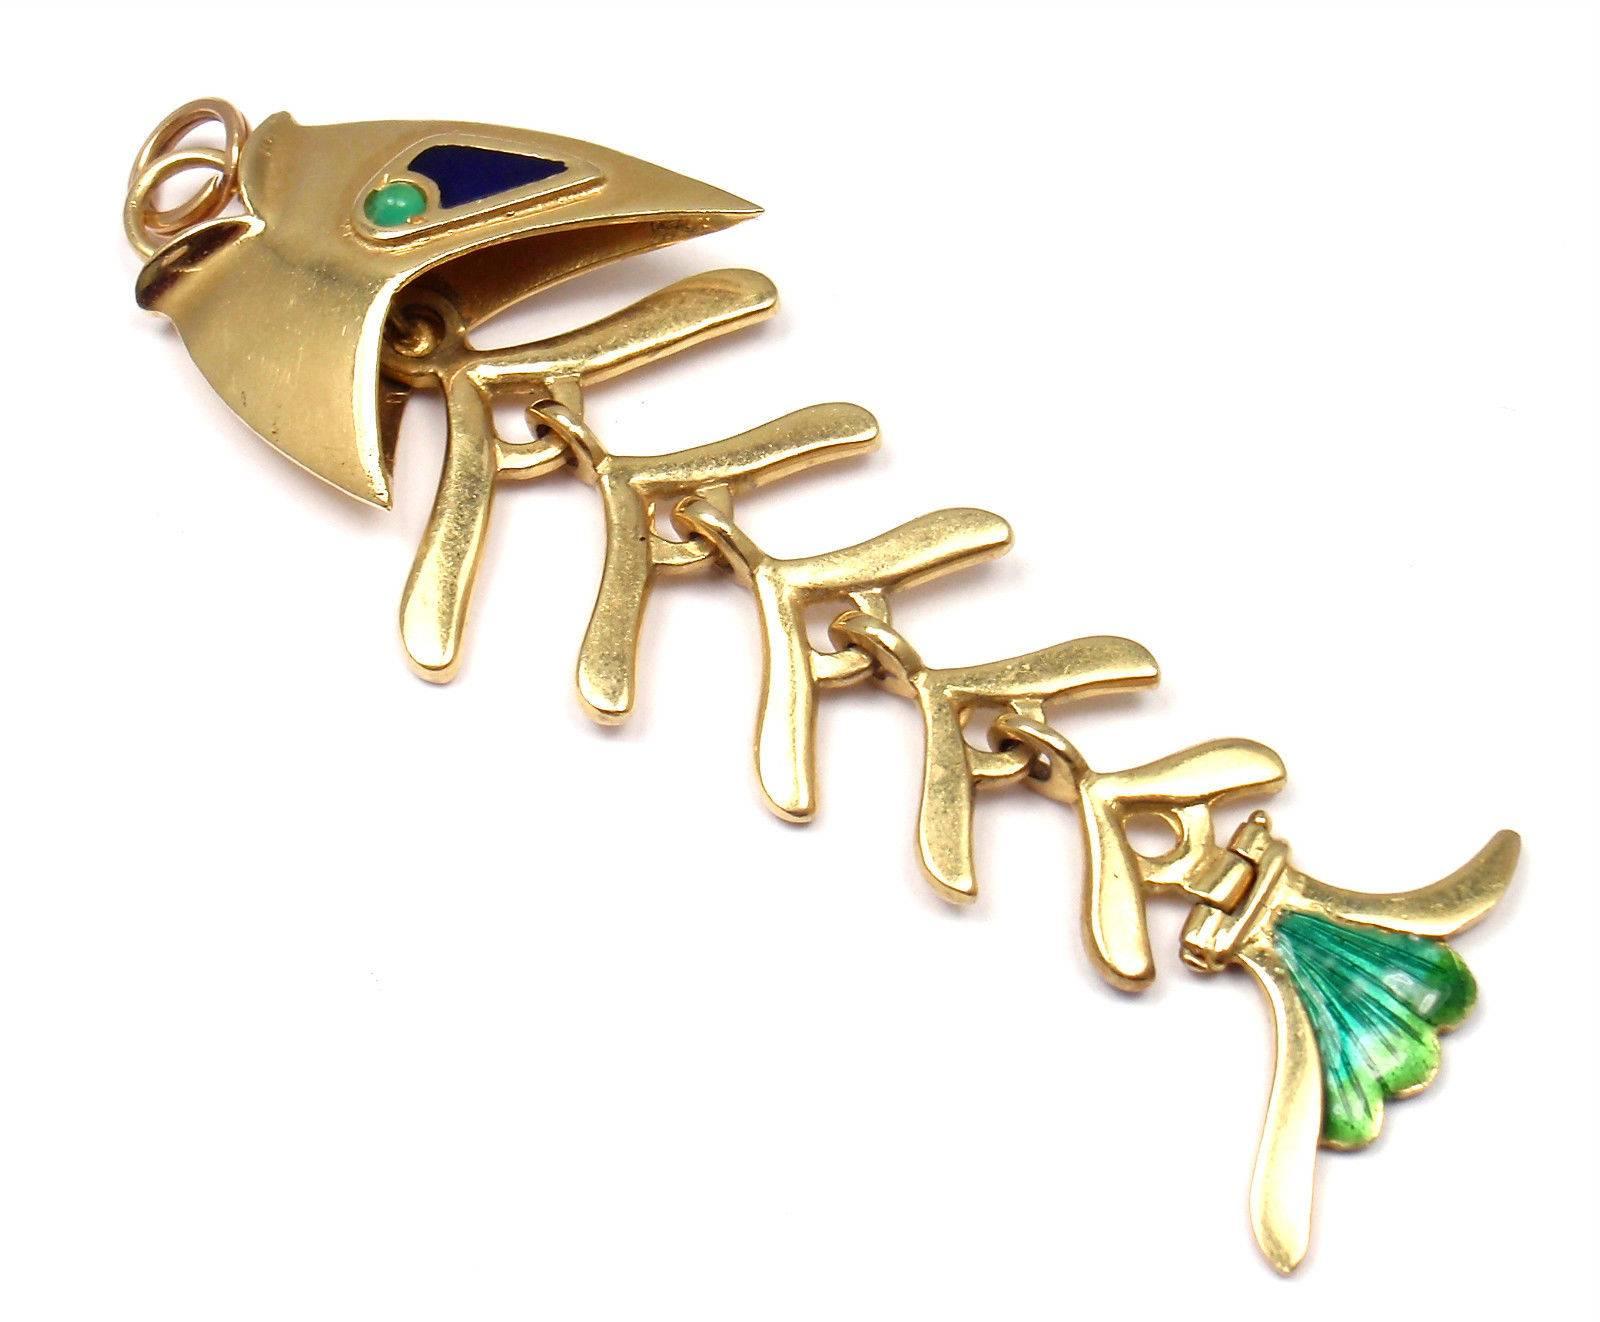 18k Yellow Gold Enamel Emerald Large Fish Animated Pendant from Estate of Jackie Collins.
With 2 cabochon emeralds in the eyes
Details: 
Weight: 20.4 grams
Measurements: 3